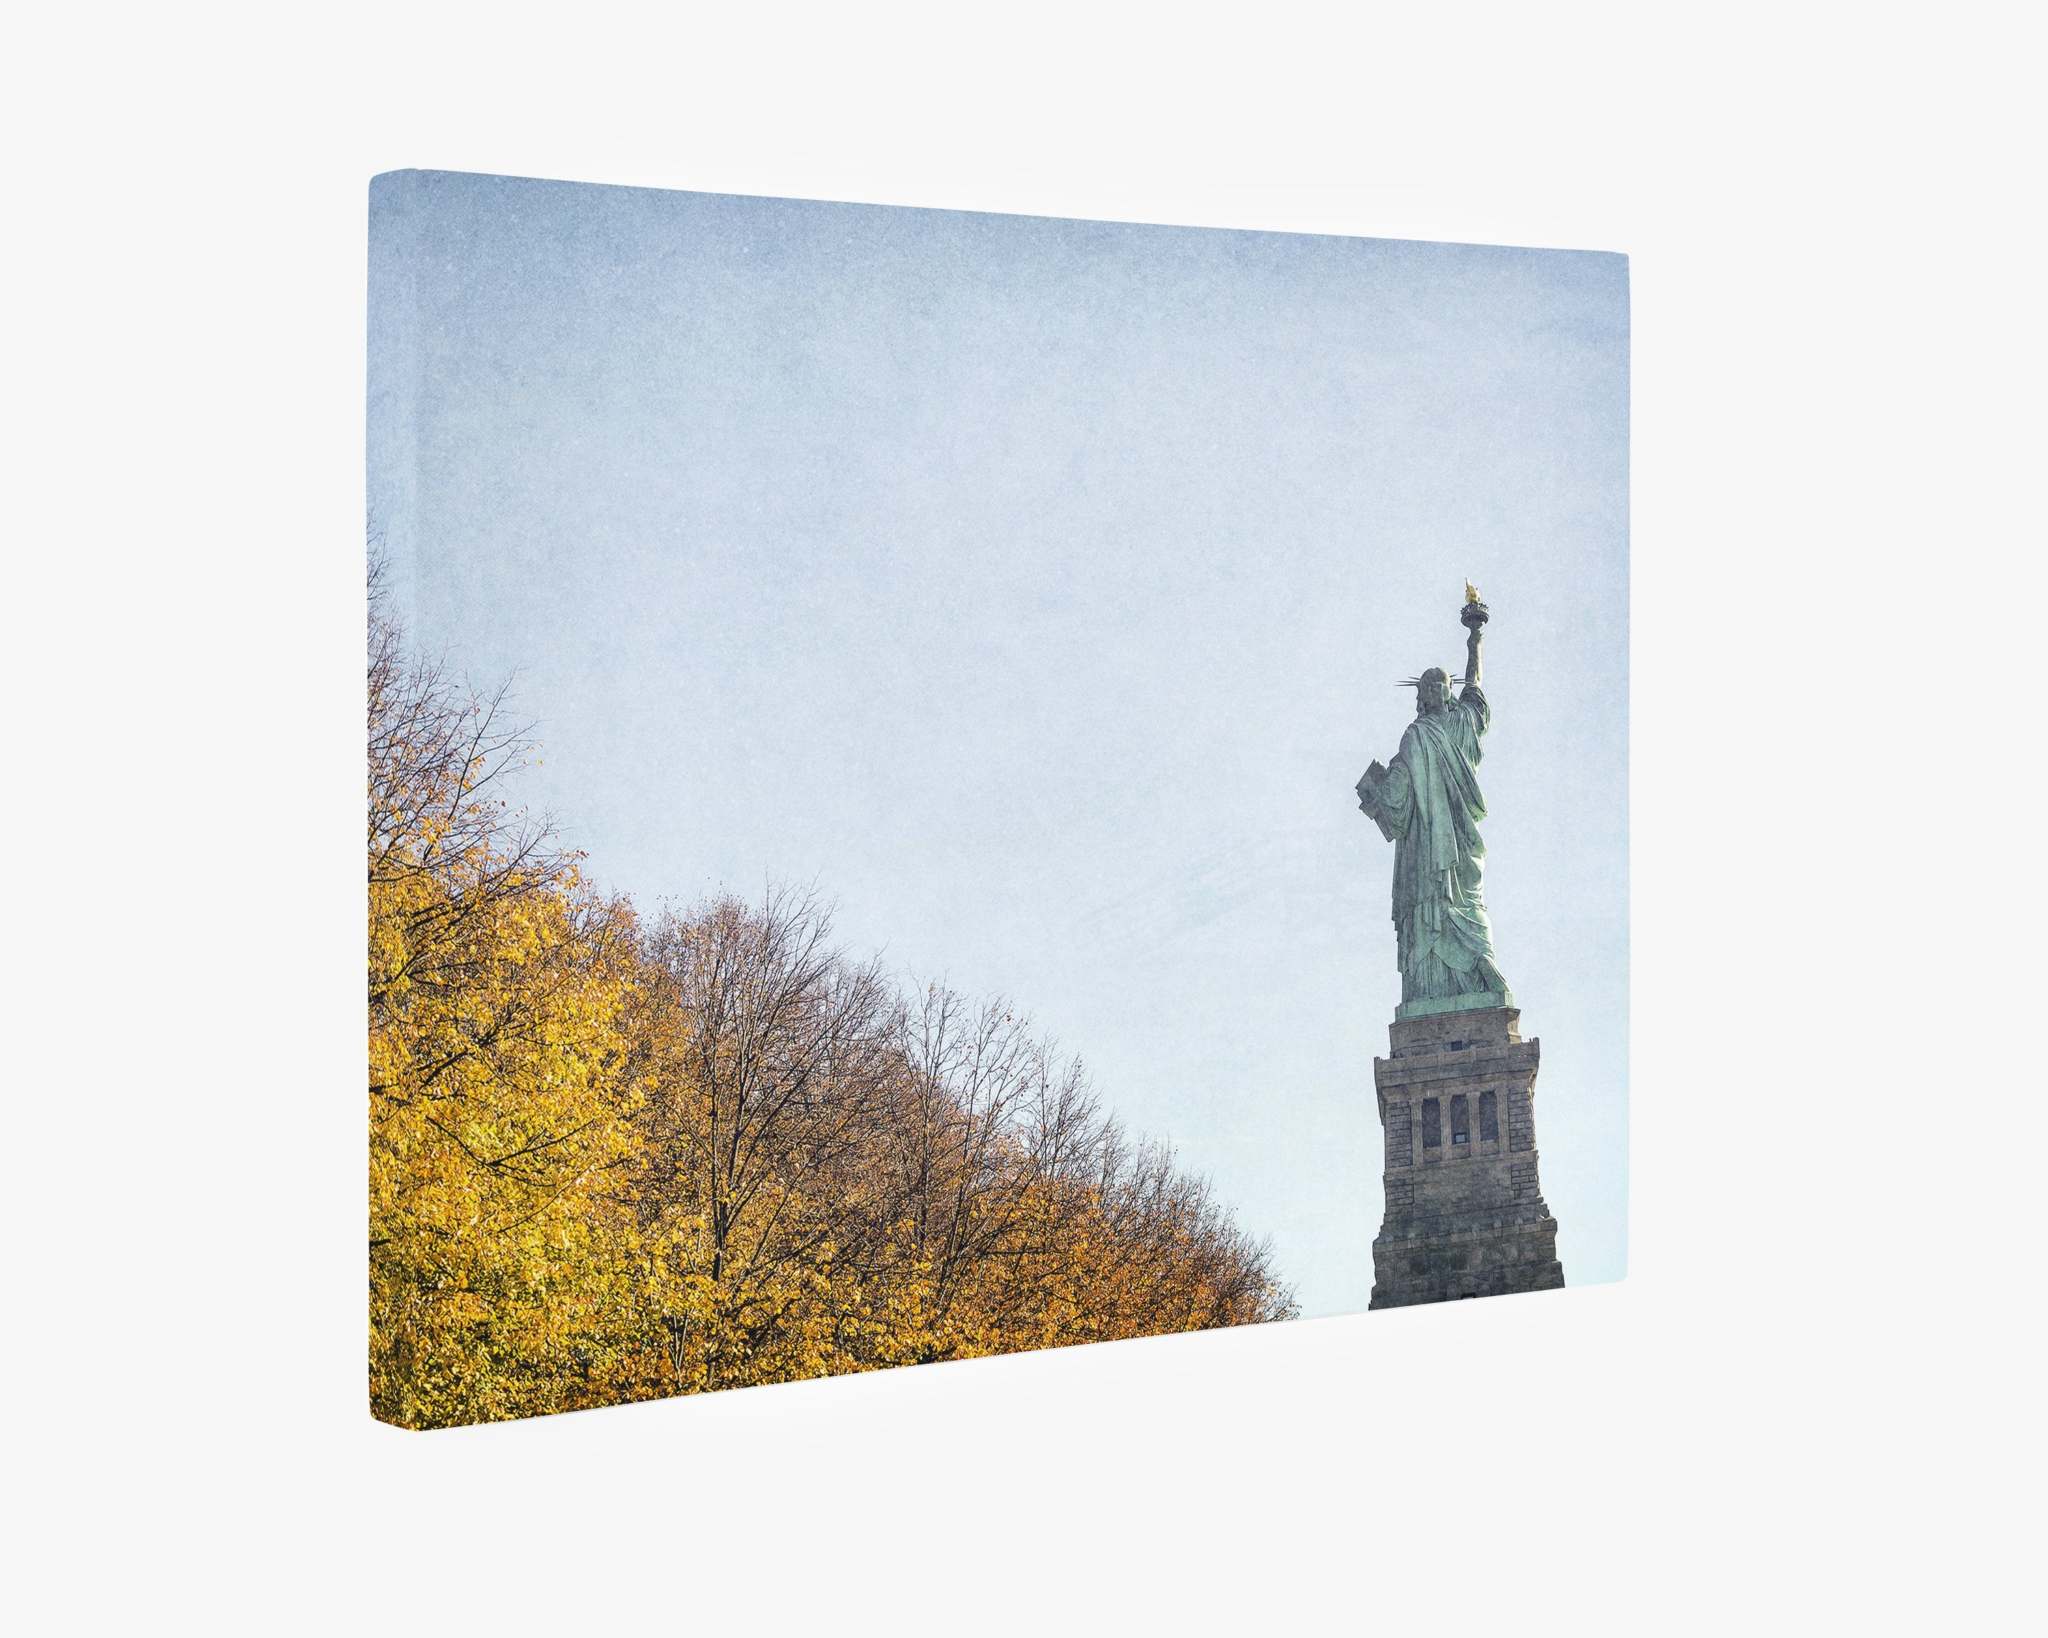 An Offley Green New York City Canvas Wall Art, 'Liberty in Fall' is seen from a low angle, with its iconic torch raised in her right hand. To the left, leafless trees with yellow foliage are visible under a clear blue sky, all rendered on premium artist-grade canvas.